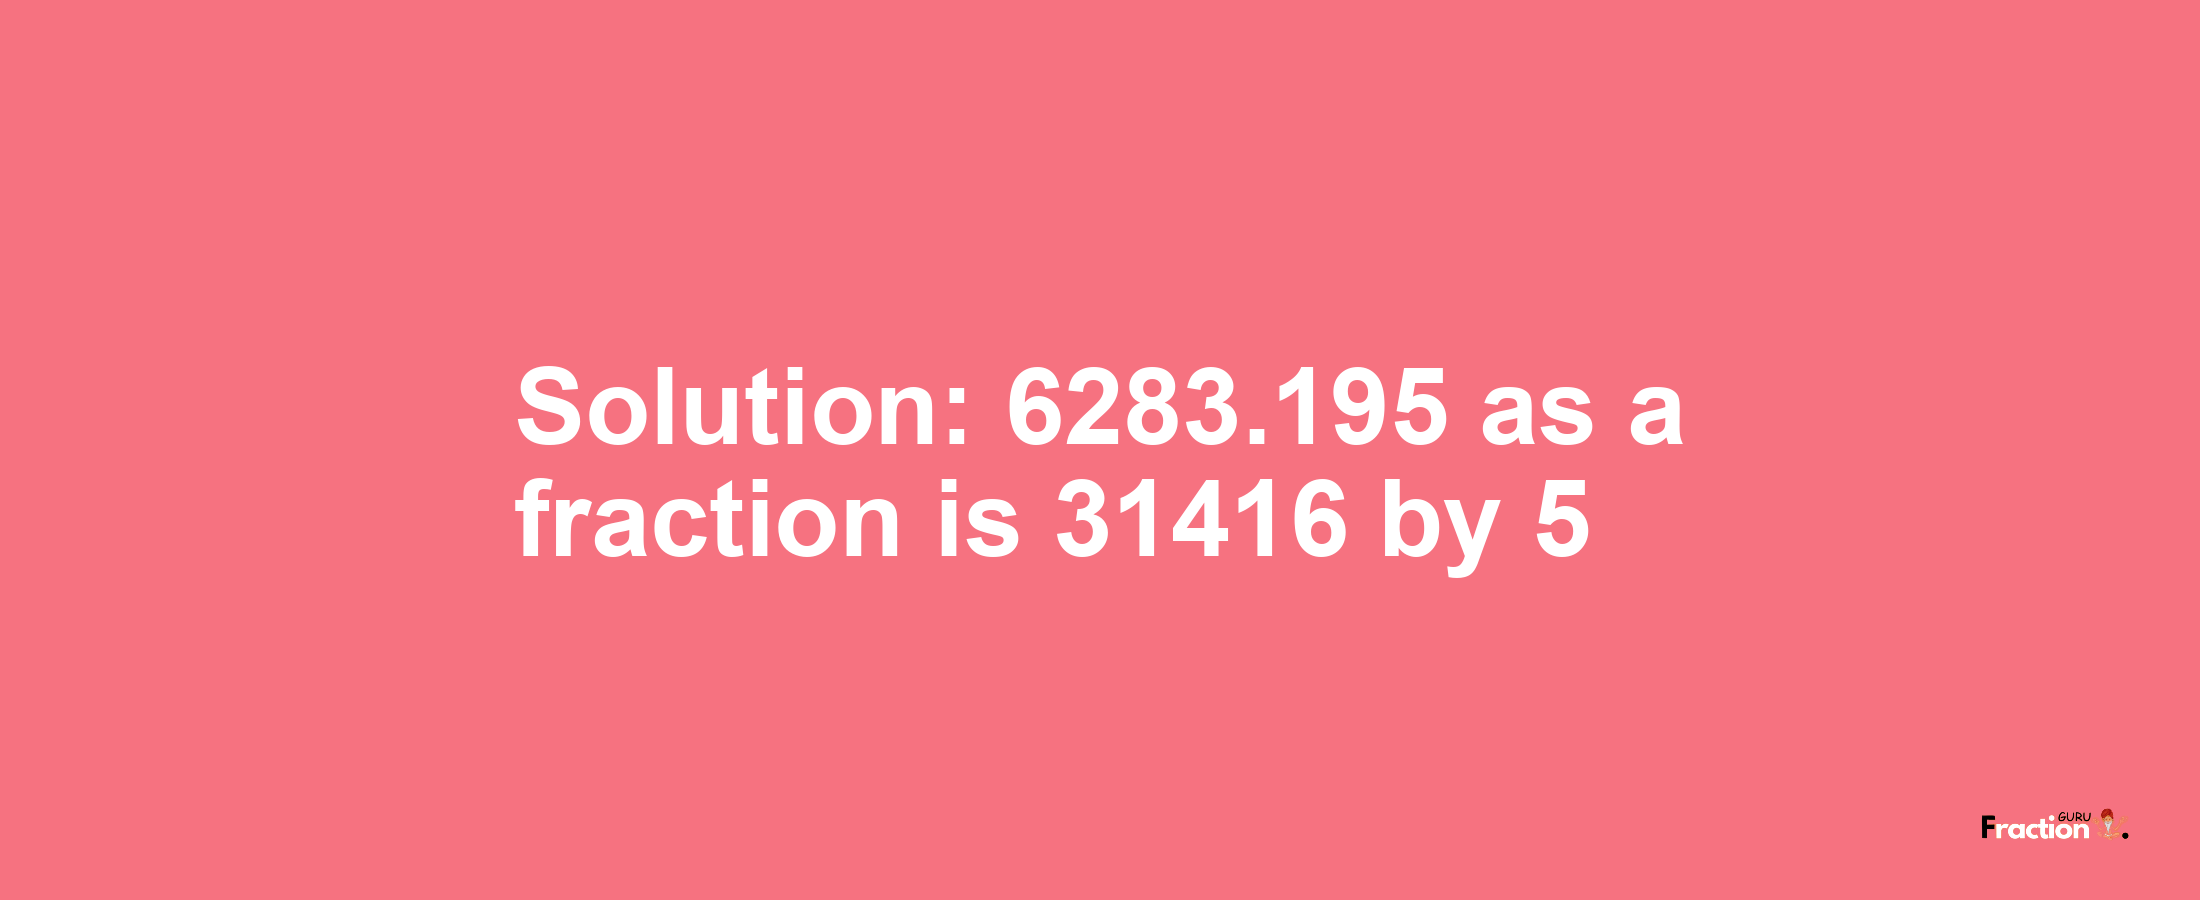 Solution:6283.195 as a fraction is 31416/5